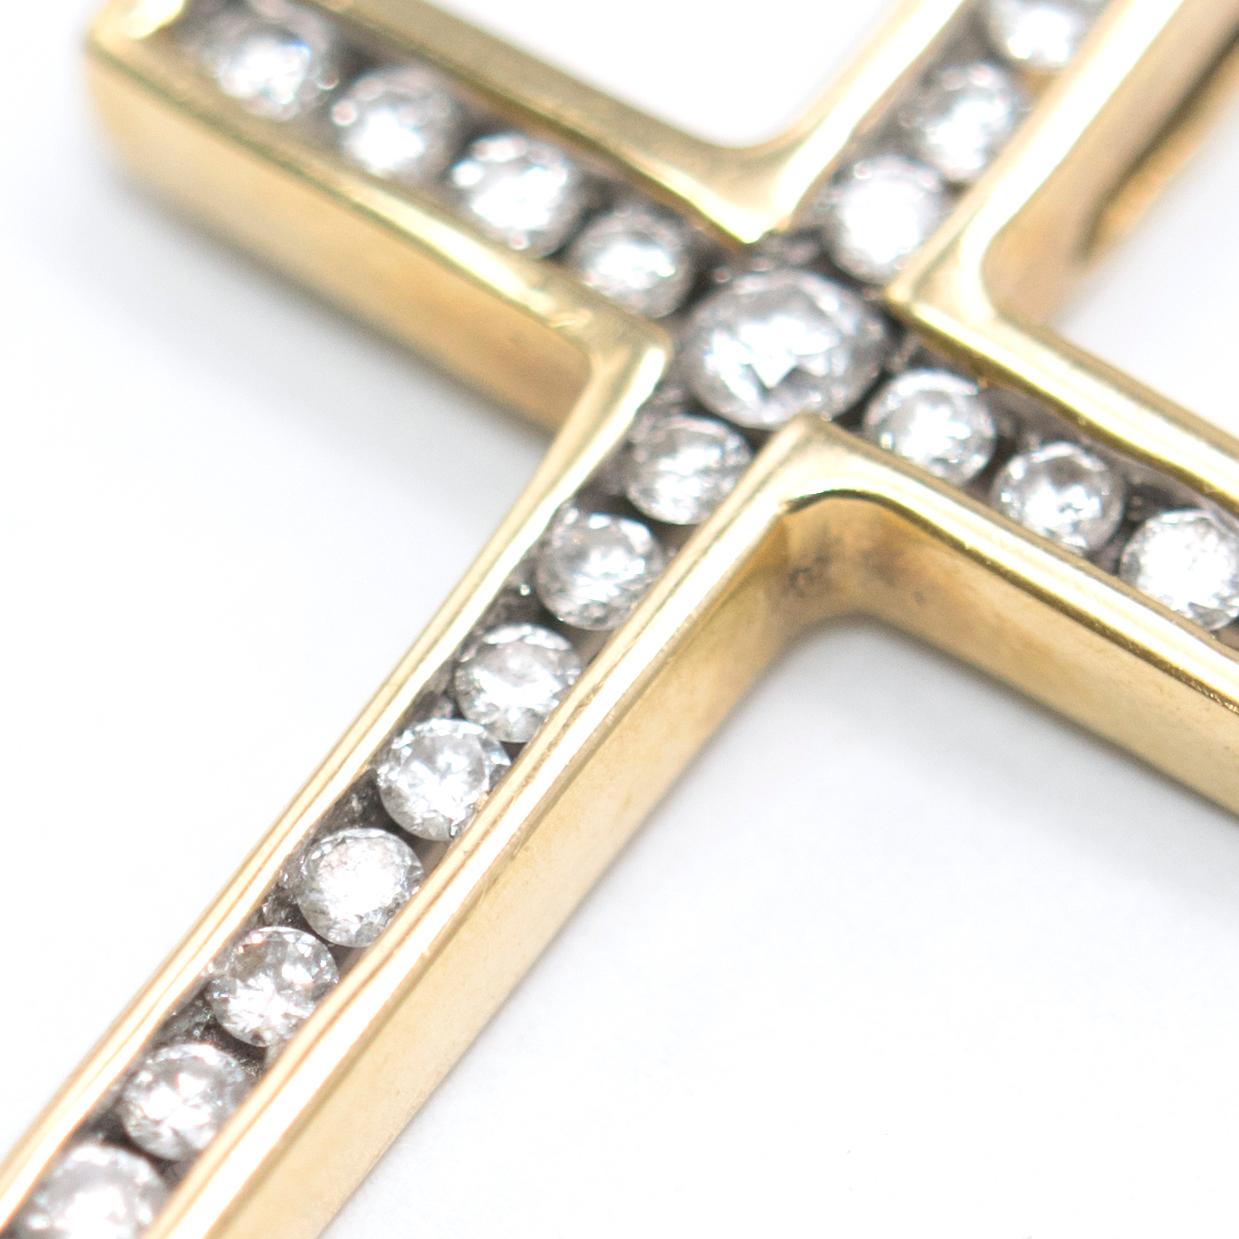 Bespoke Diamond Gold Cross Pendant

- 18ct Gold Cross 
- 0.25ct Diamond Weight in rub-over setting 
- Full hallmarked with Assay markand 0.25 diamond weight 
- Clear white diamonds 

Please note, these items are pre-owned and may show some signs of